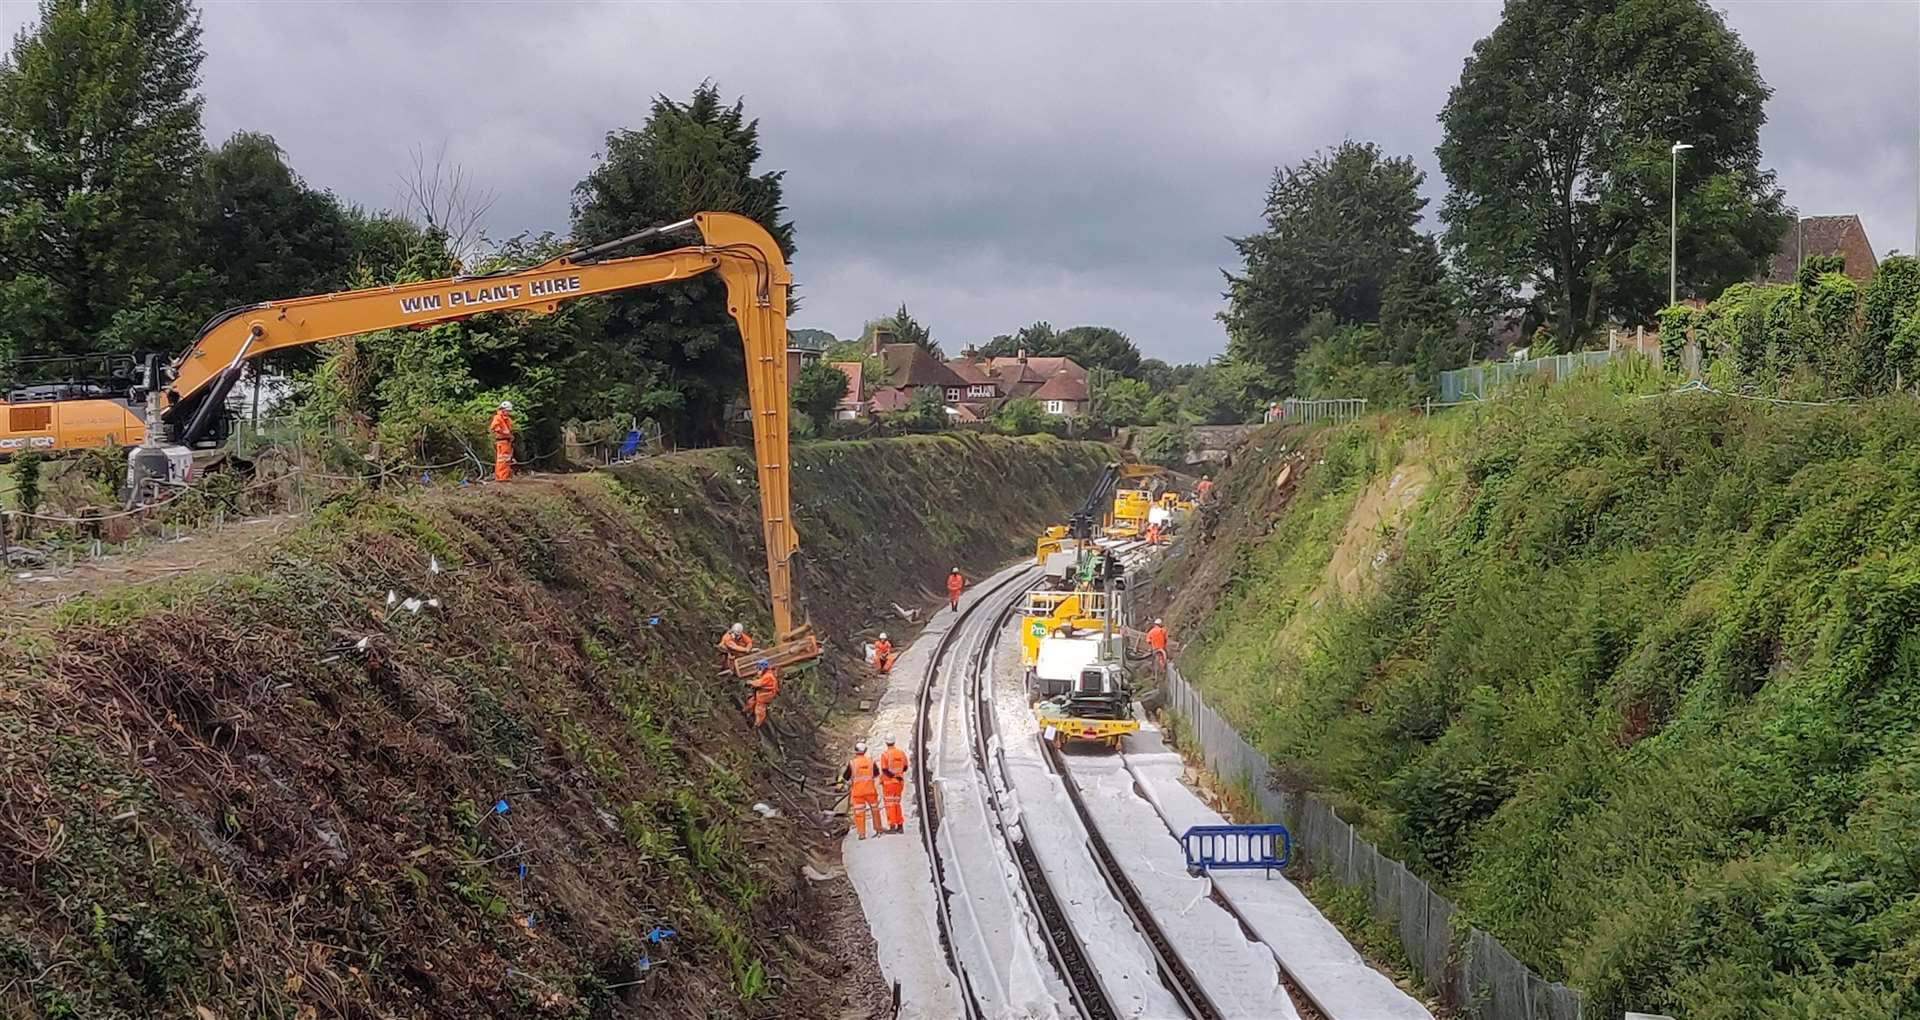 Network Rail carrying out similar landslide prevention work at Bearsted